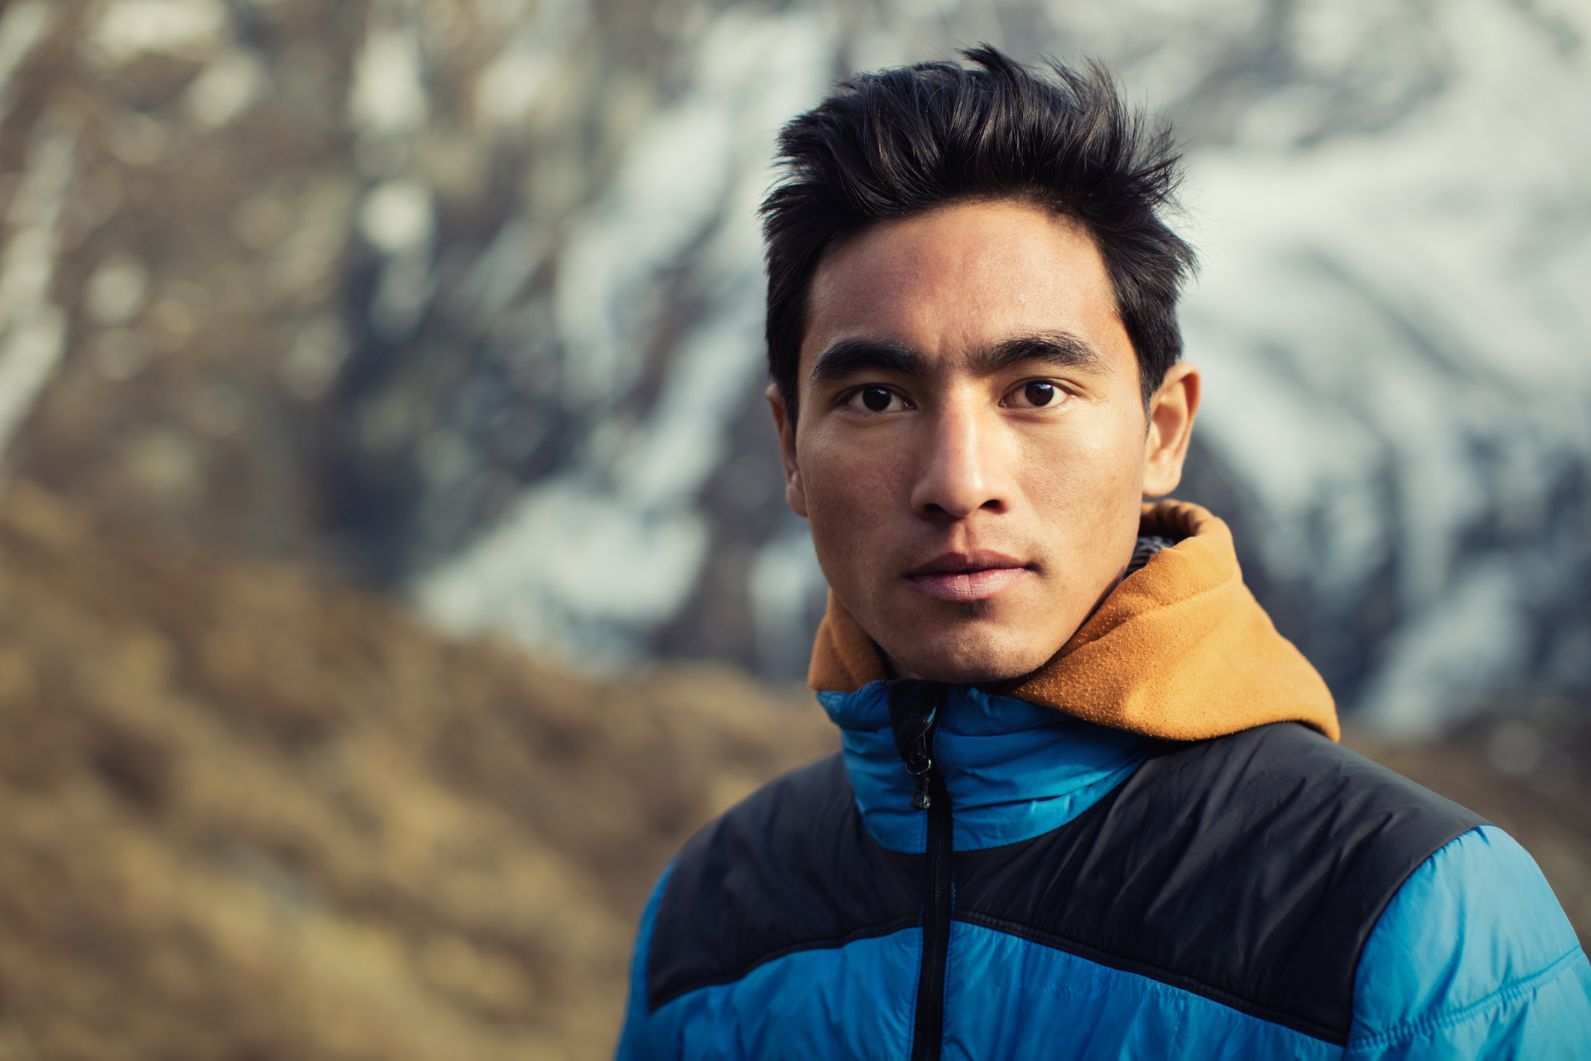 A portrait of young local mountain guide in Nepal. Local guides here are renowned for their strength and expertise. Photo: Getty